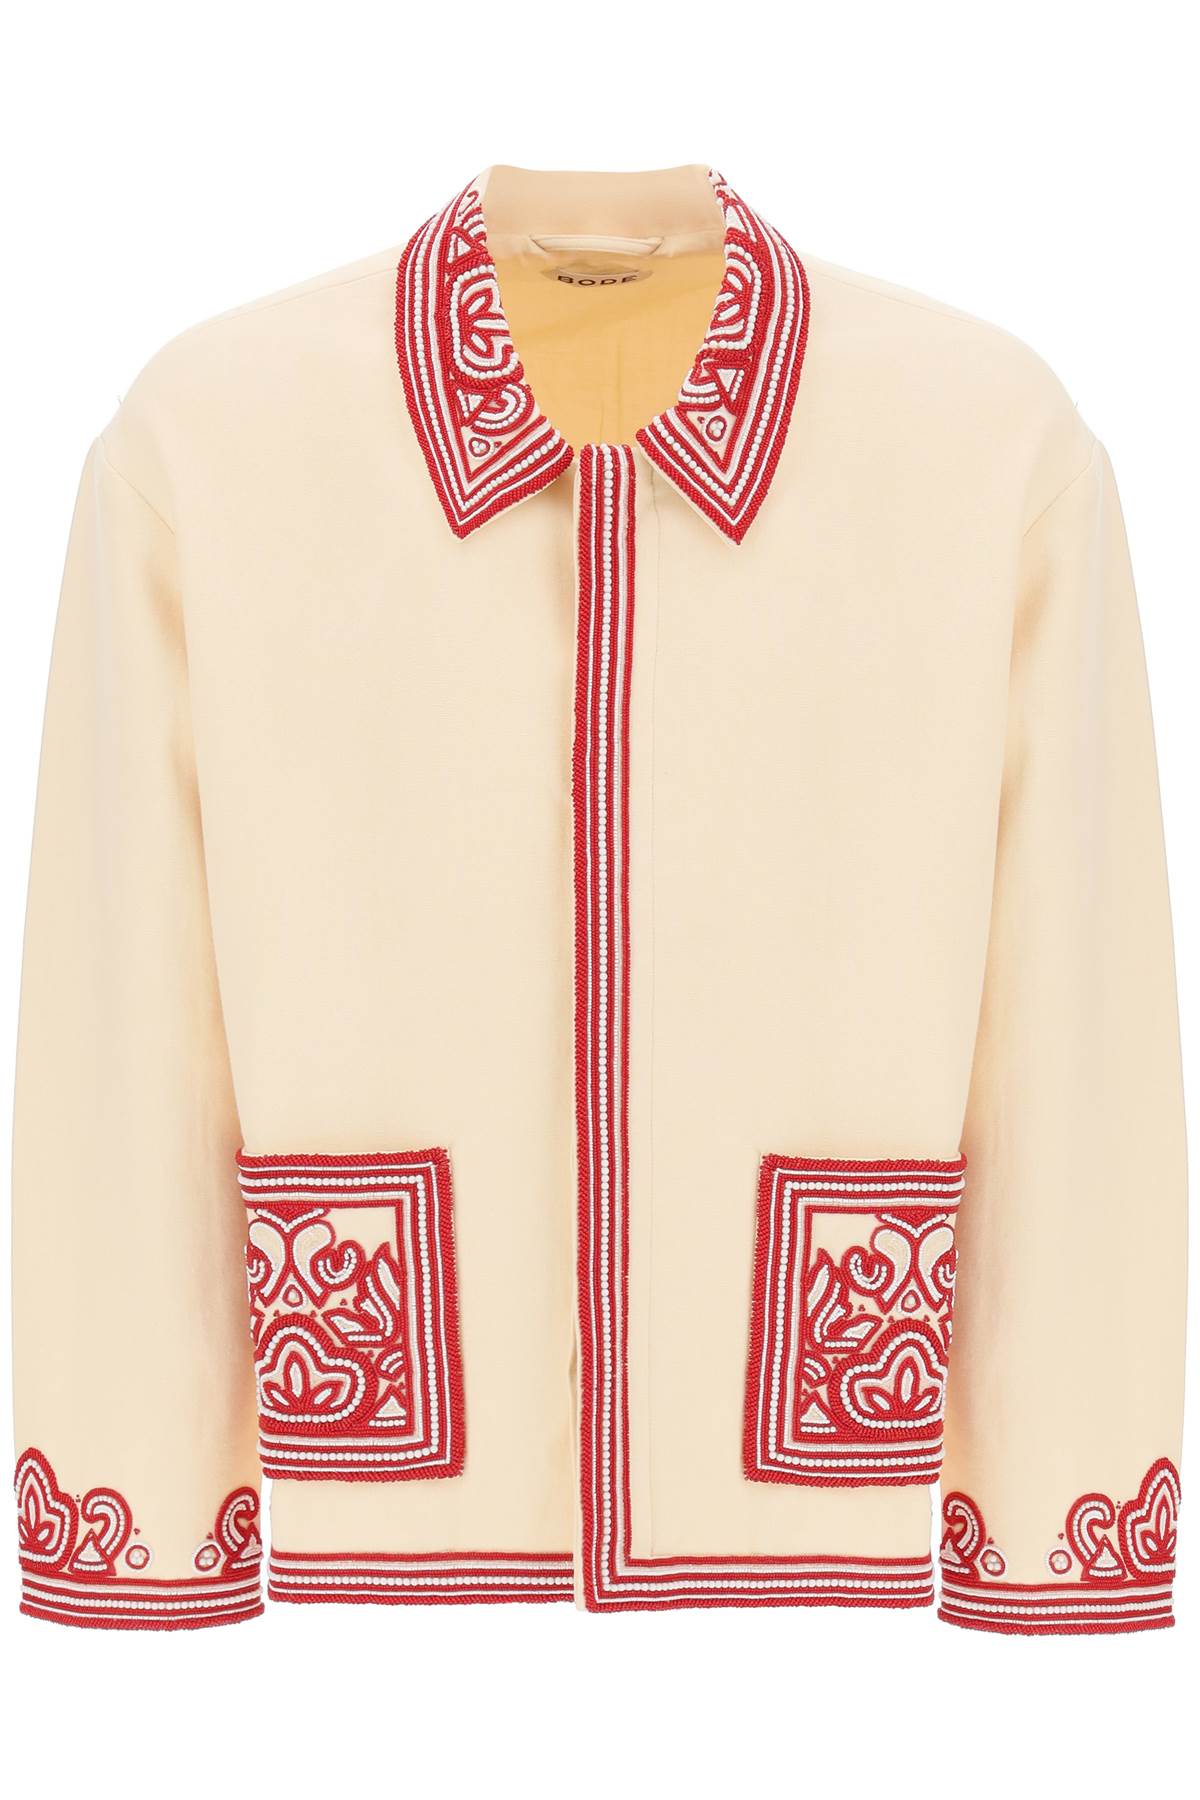 Bode flora bead-embroidered jacket-0